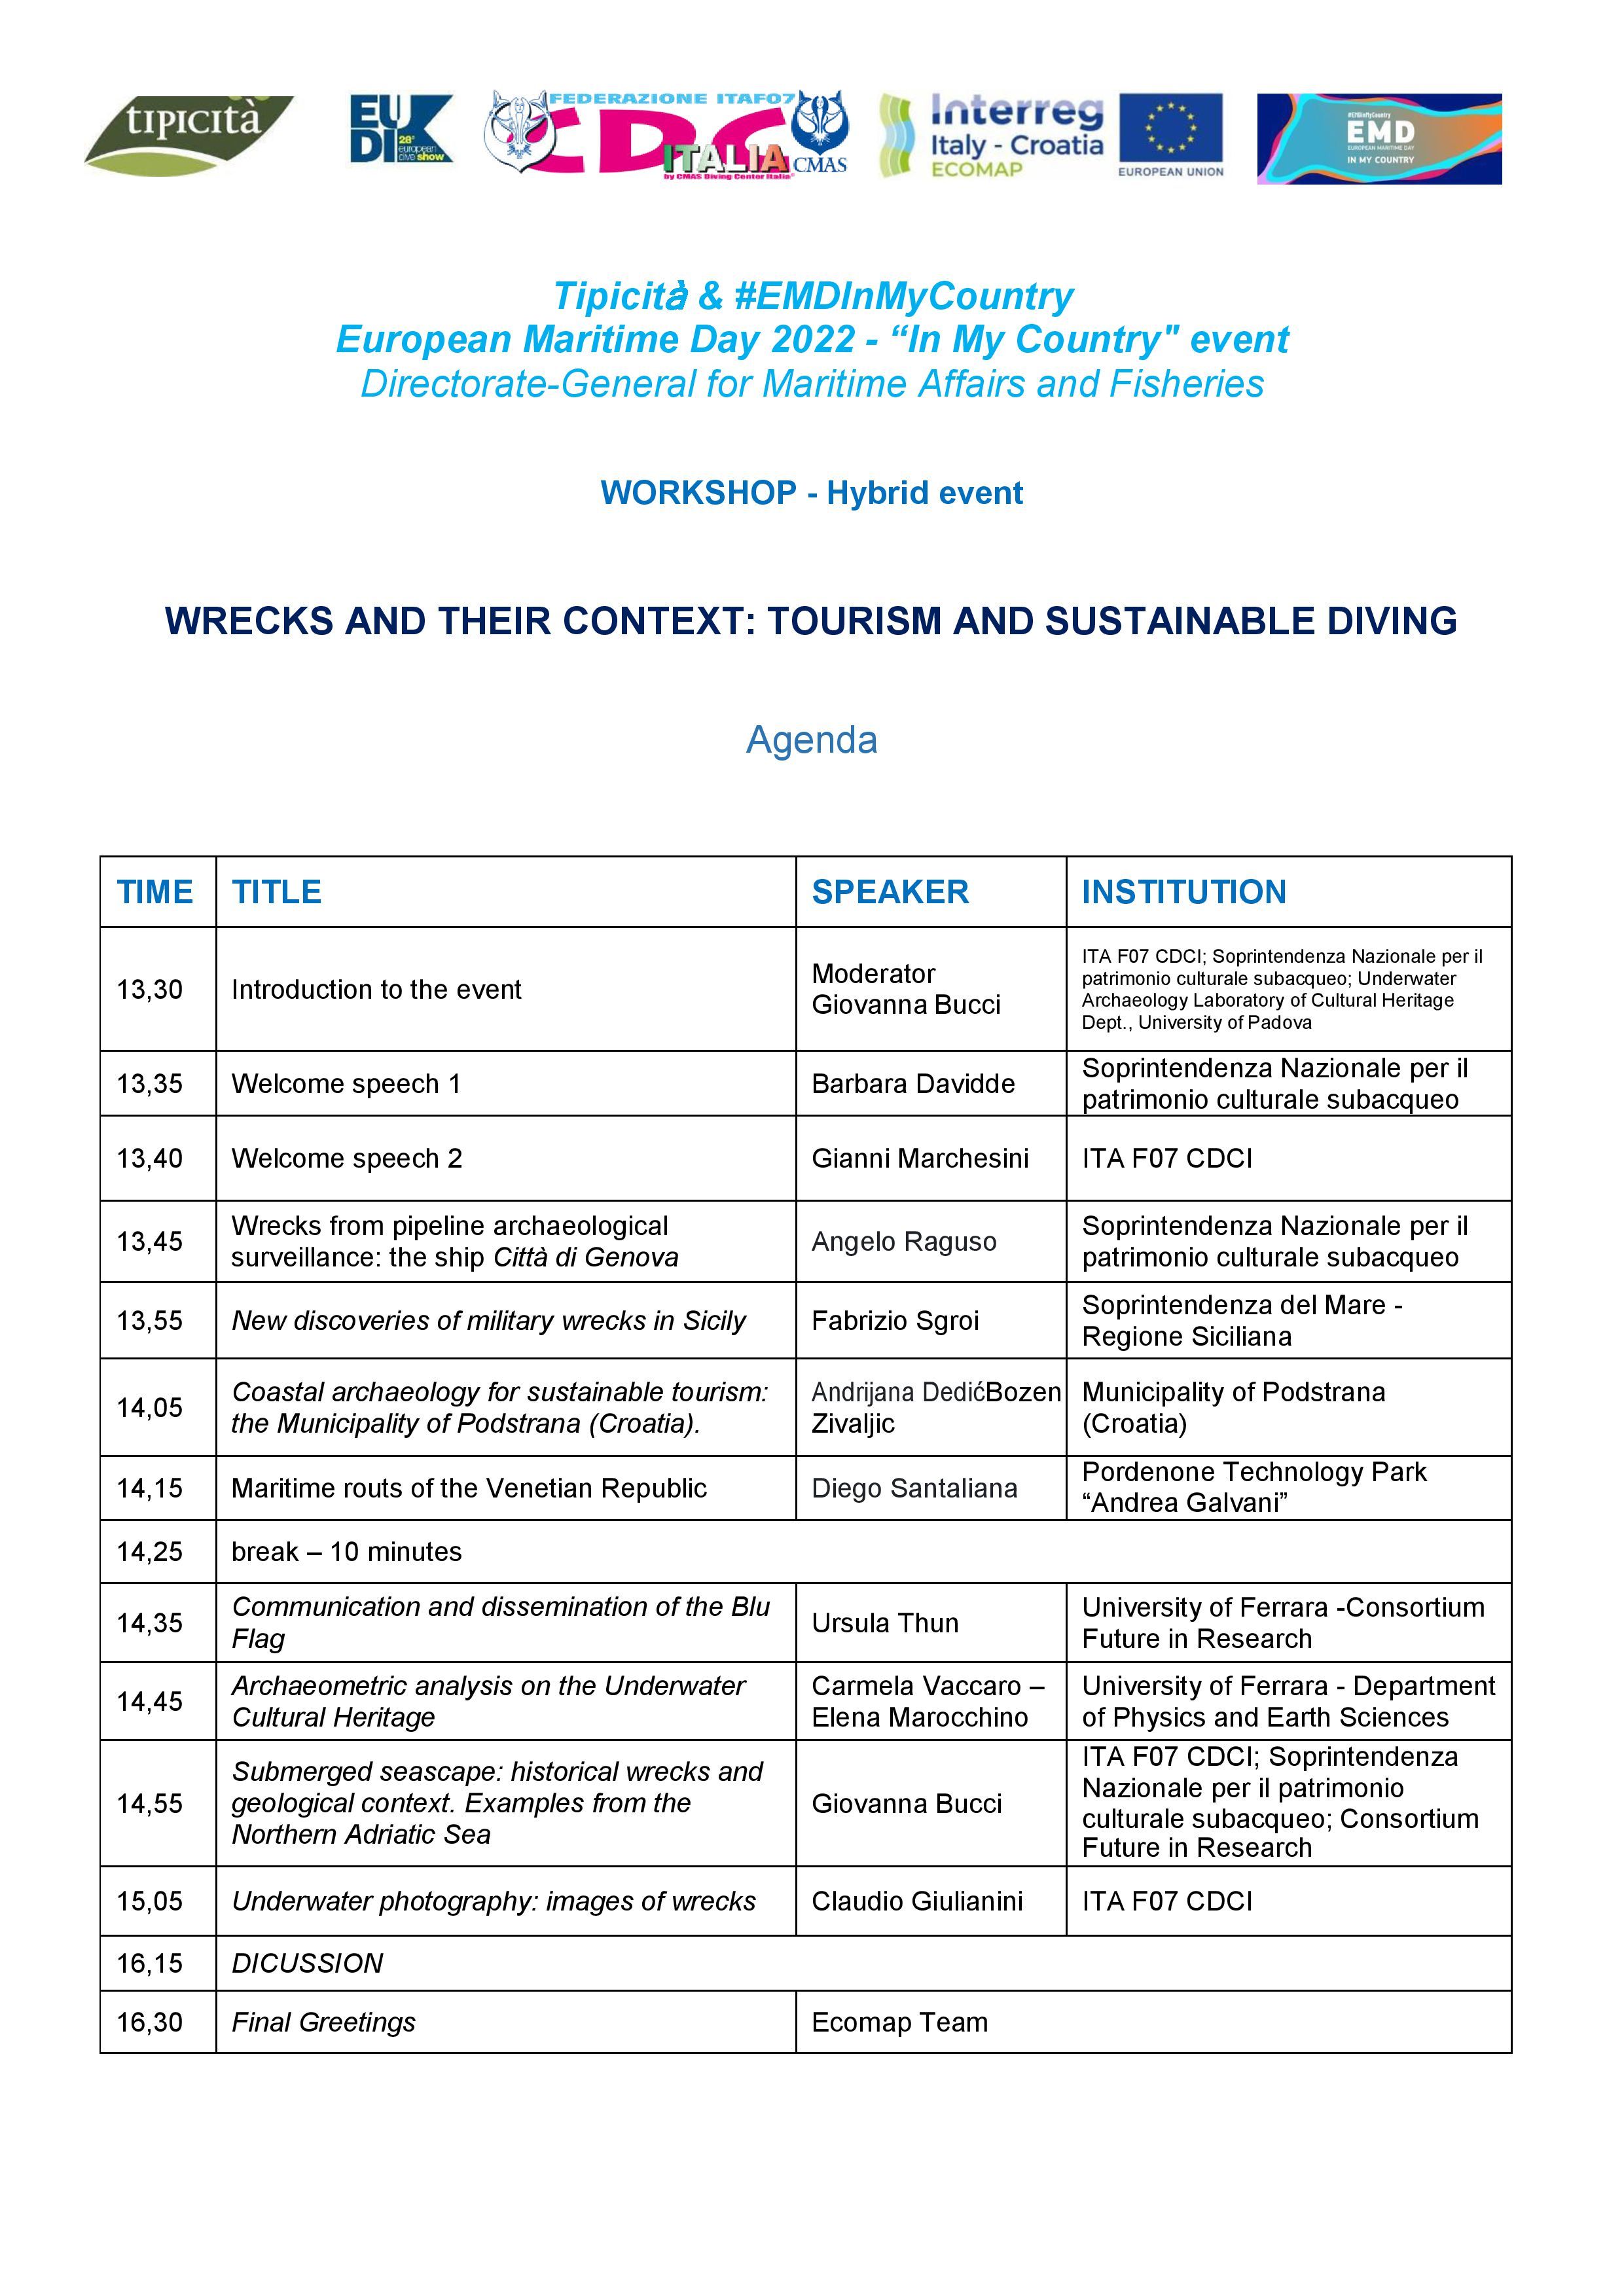 WORKSHOP ON WRECKS AND THEIR CONTEXT: TOURISM AND SUSTAINABLE DIVING; WORKSHOP ON REDUCING WASTE OF FRESHWATER, PLASTICS AND CONTAMINATION IN COASTAL AREAS IMPROVES THE MARINE ENVIRONMENTAL STATUS